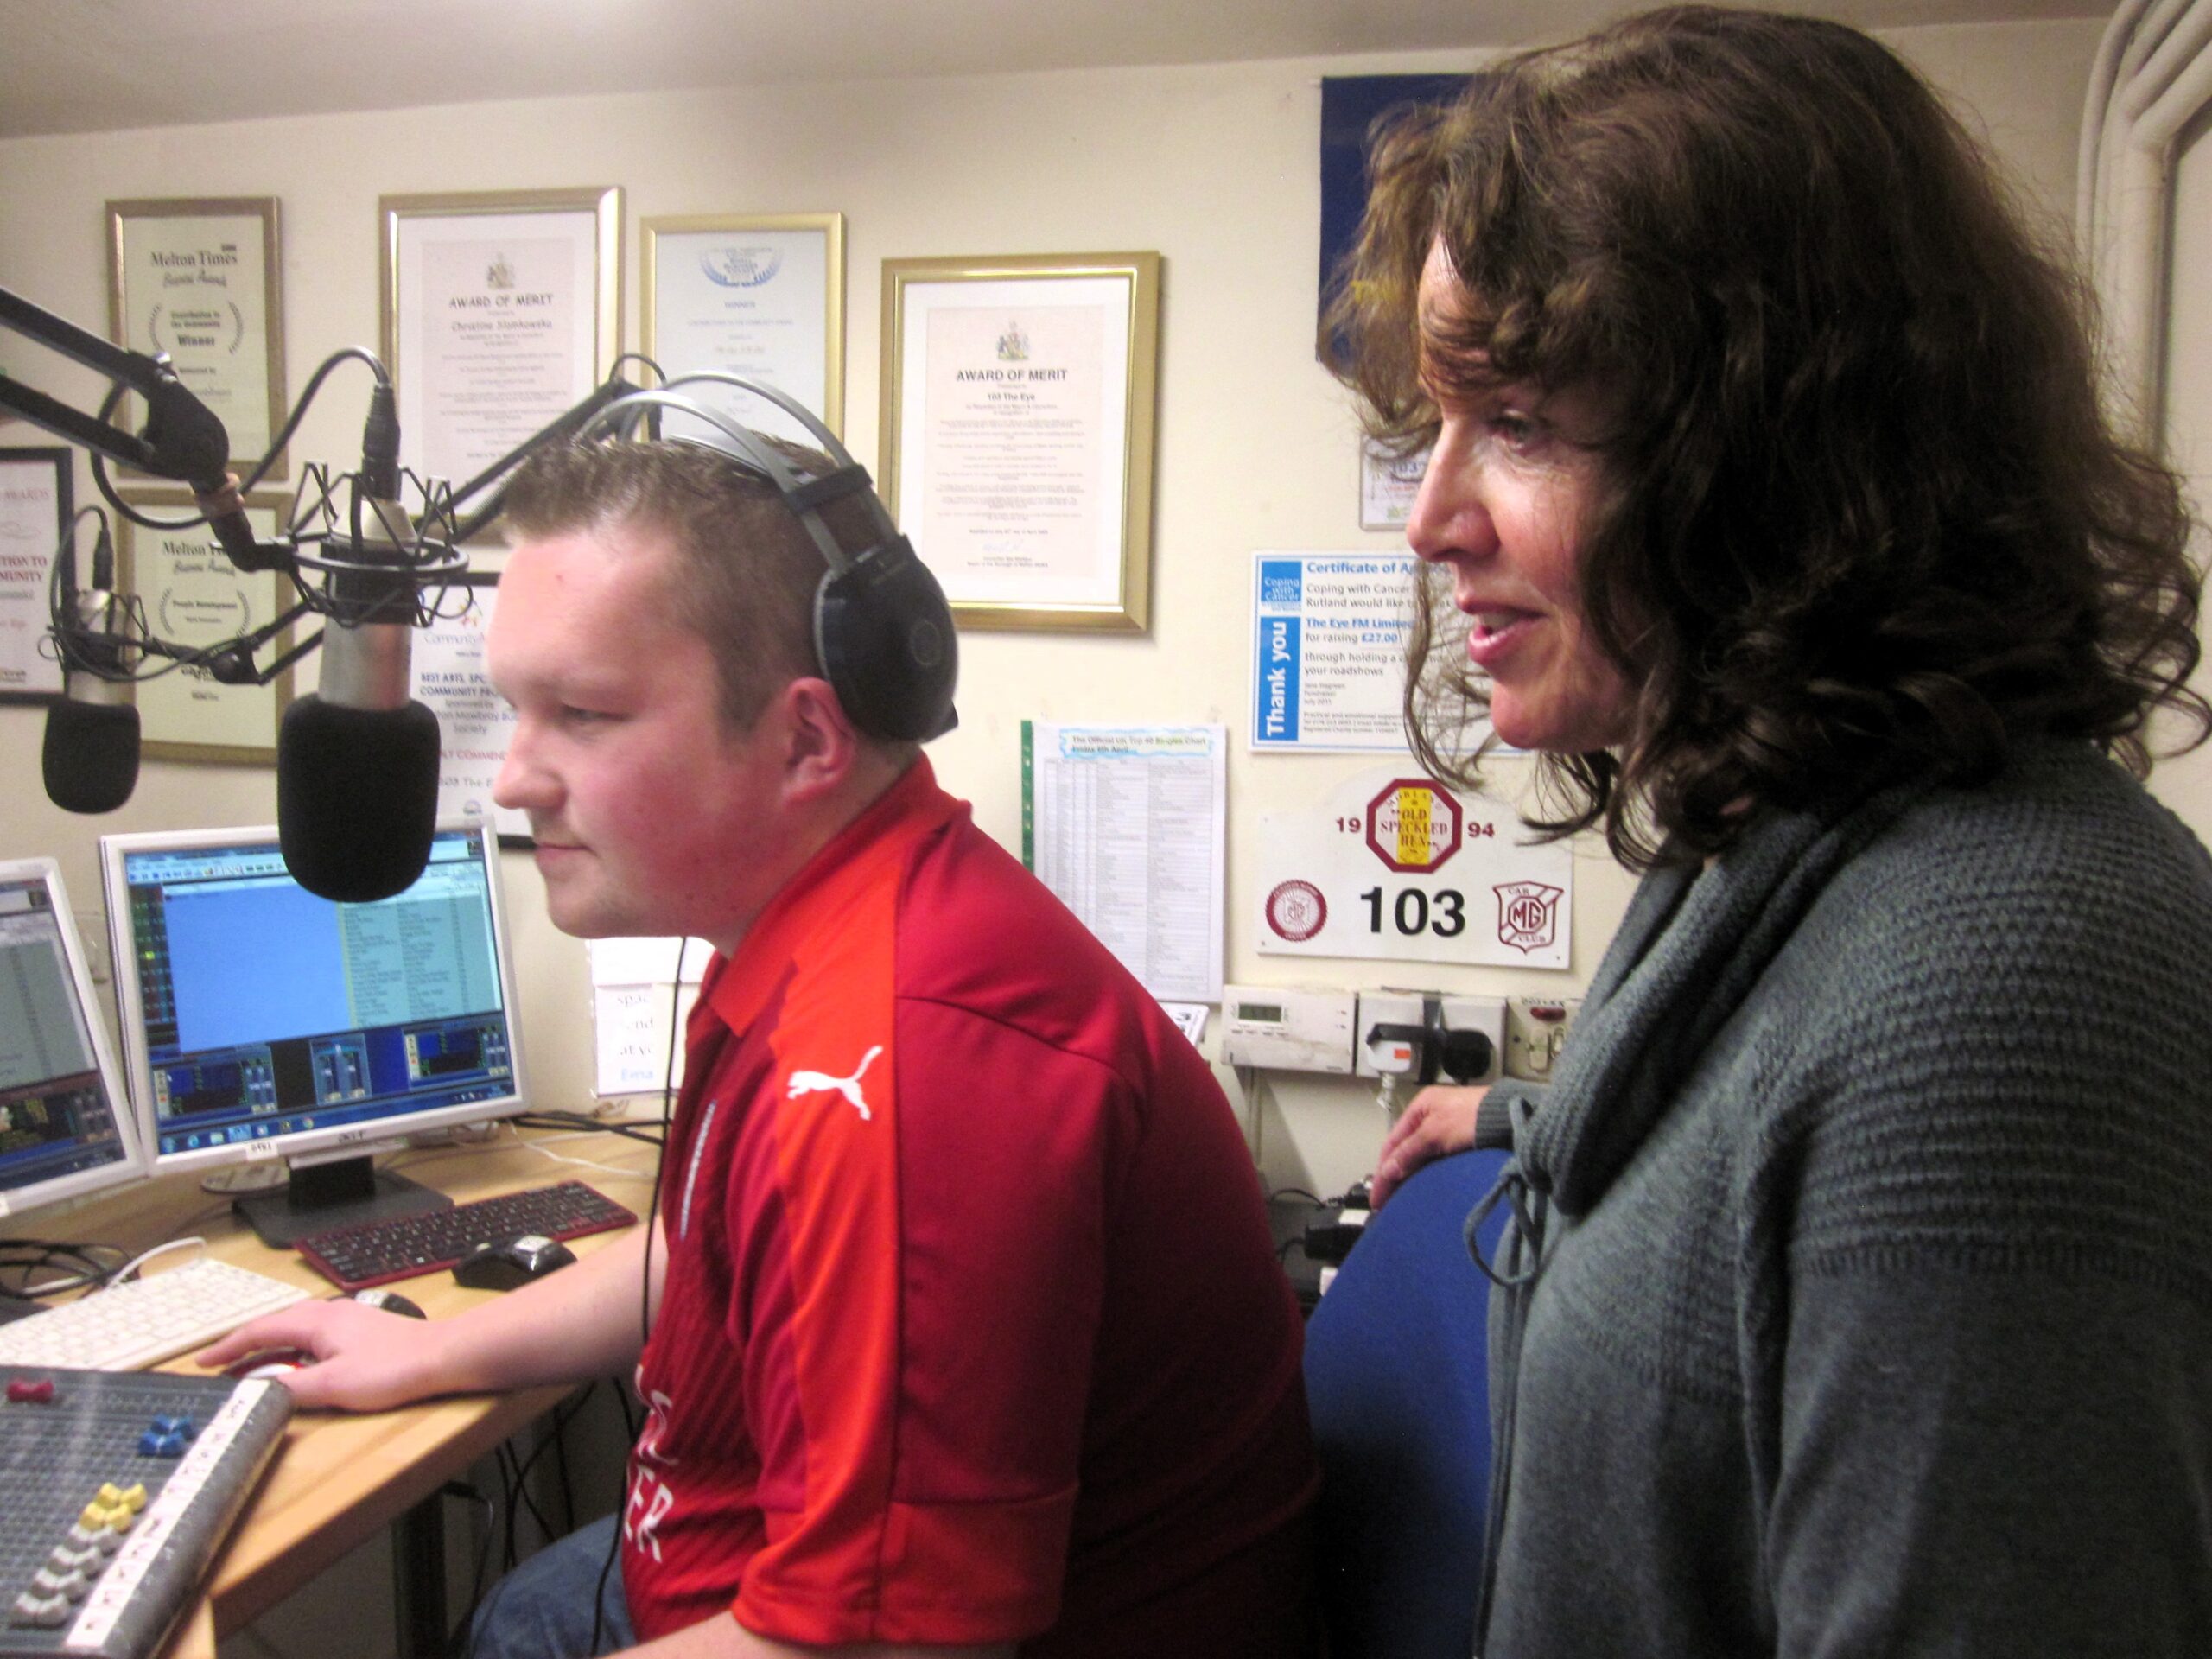 Participant observation in a radio studio